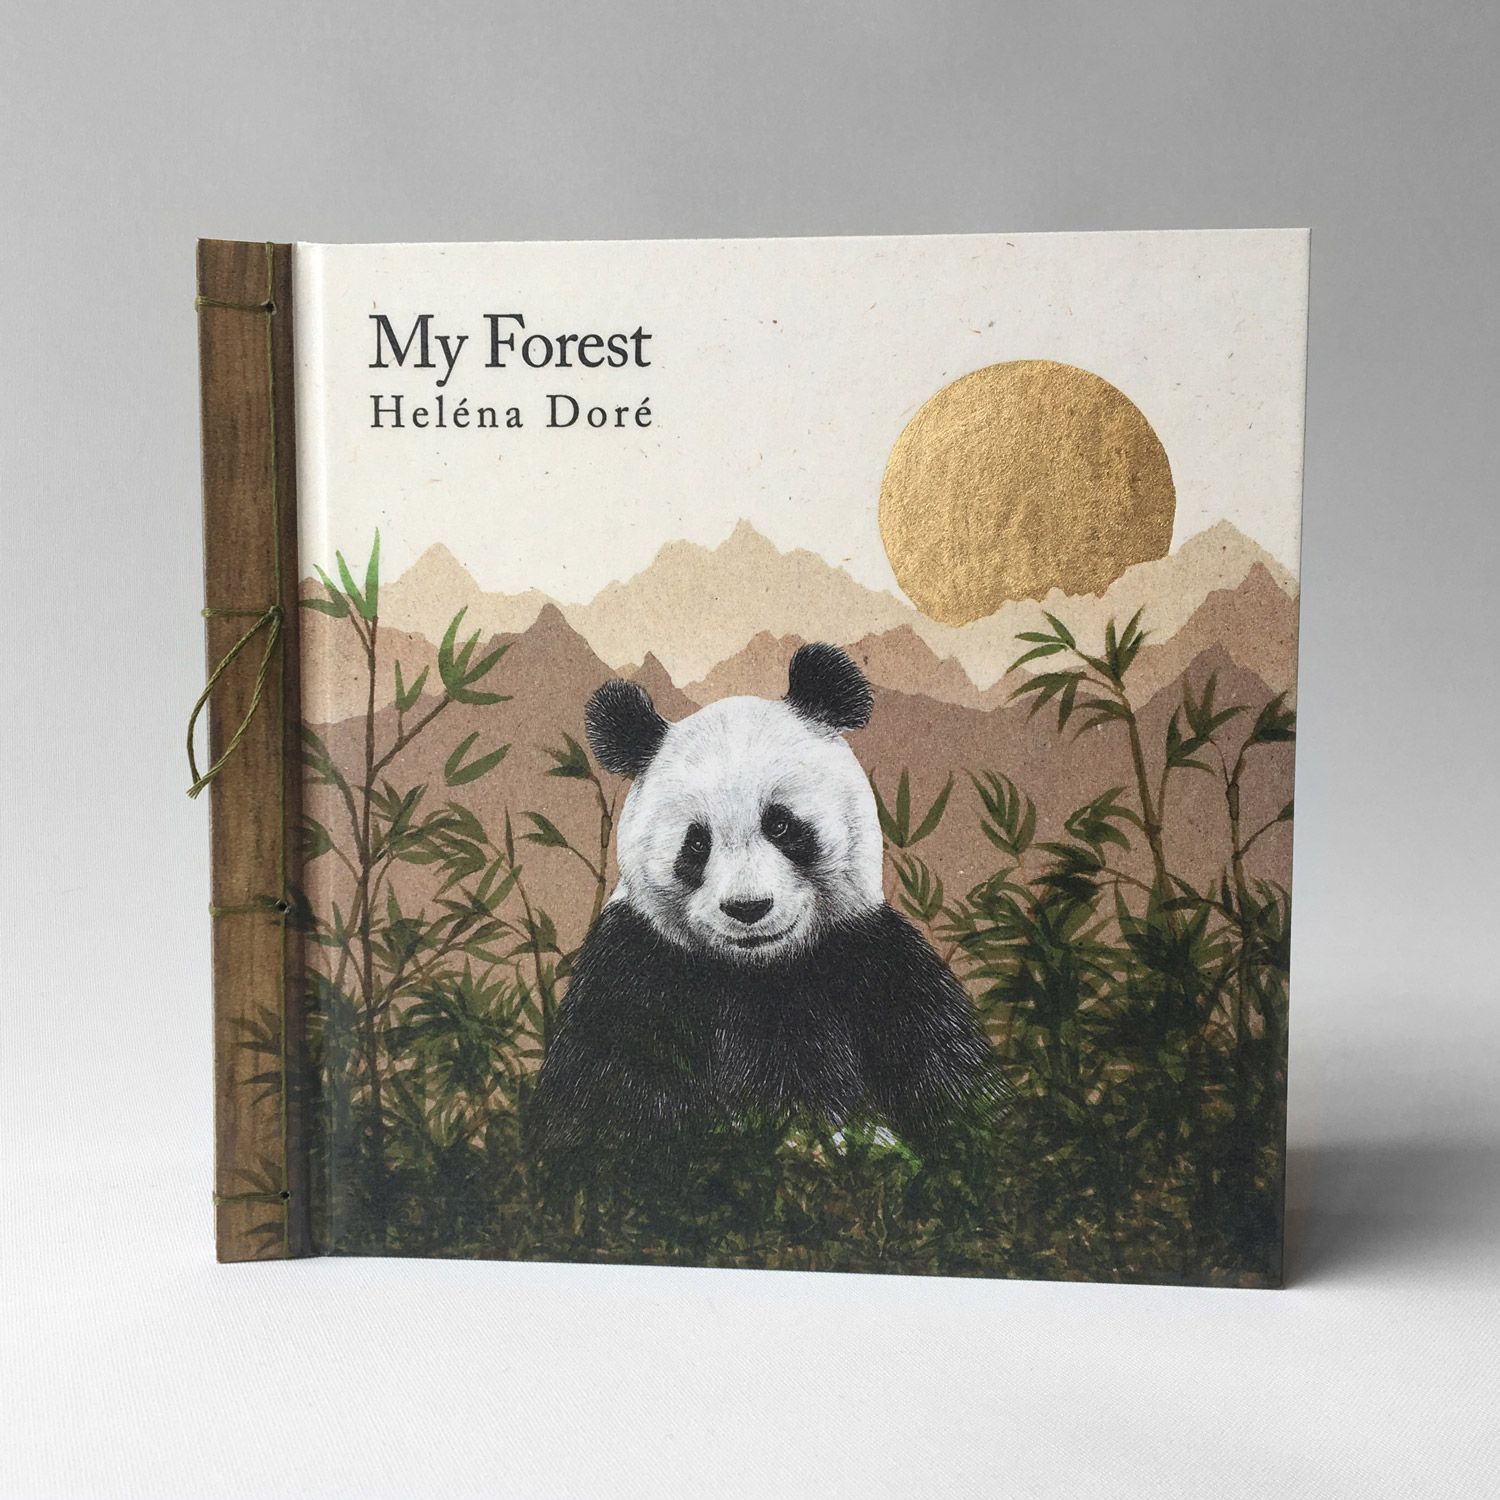 my forest palindrome narrative focusing on deforestation designed and illustrated by helena dore illustrations and design